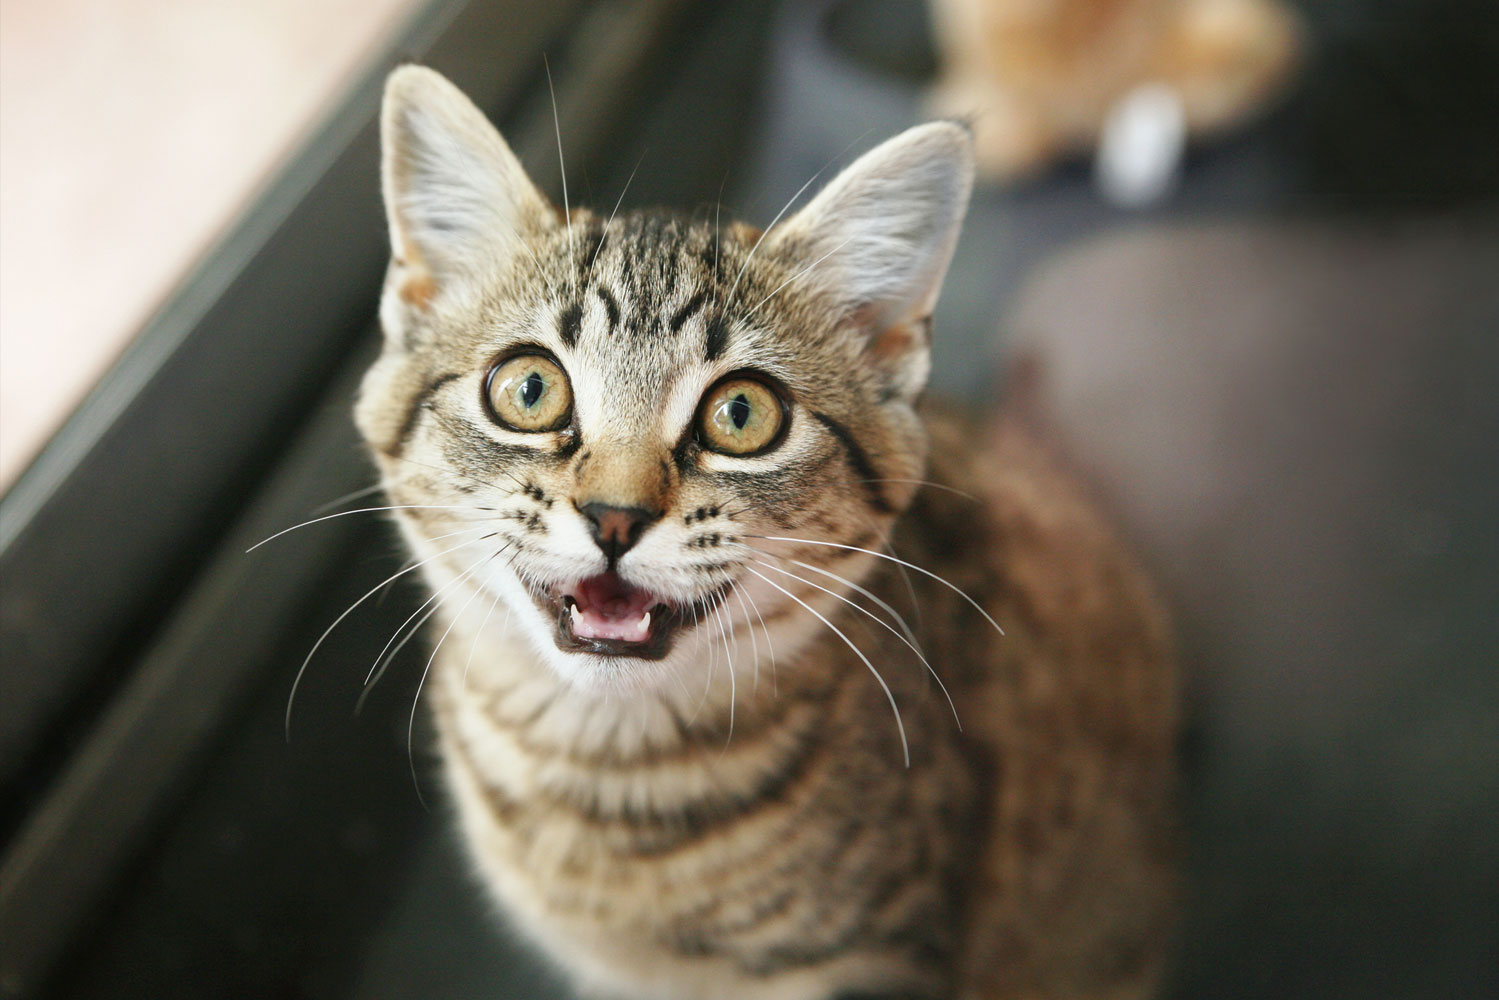 What noises annoy cats?